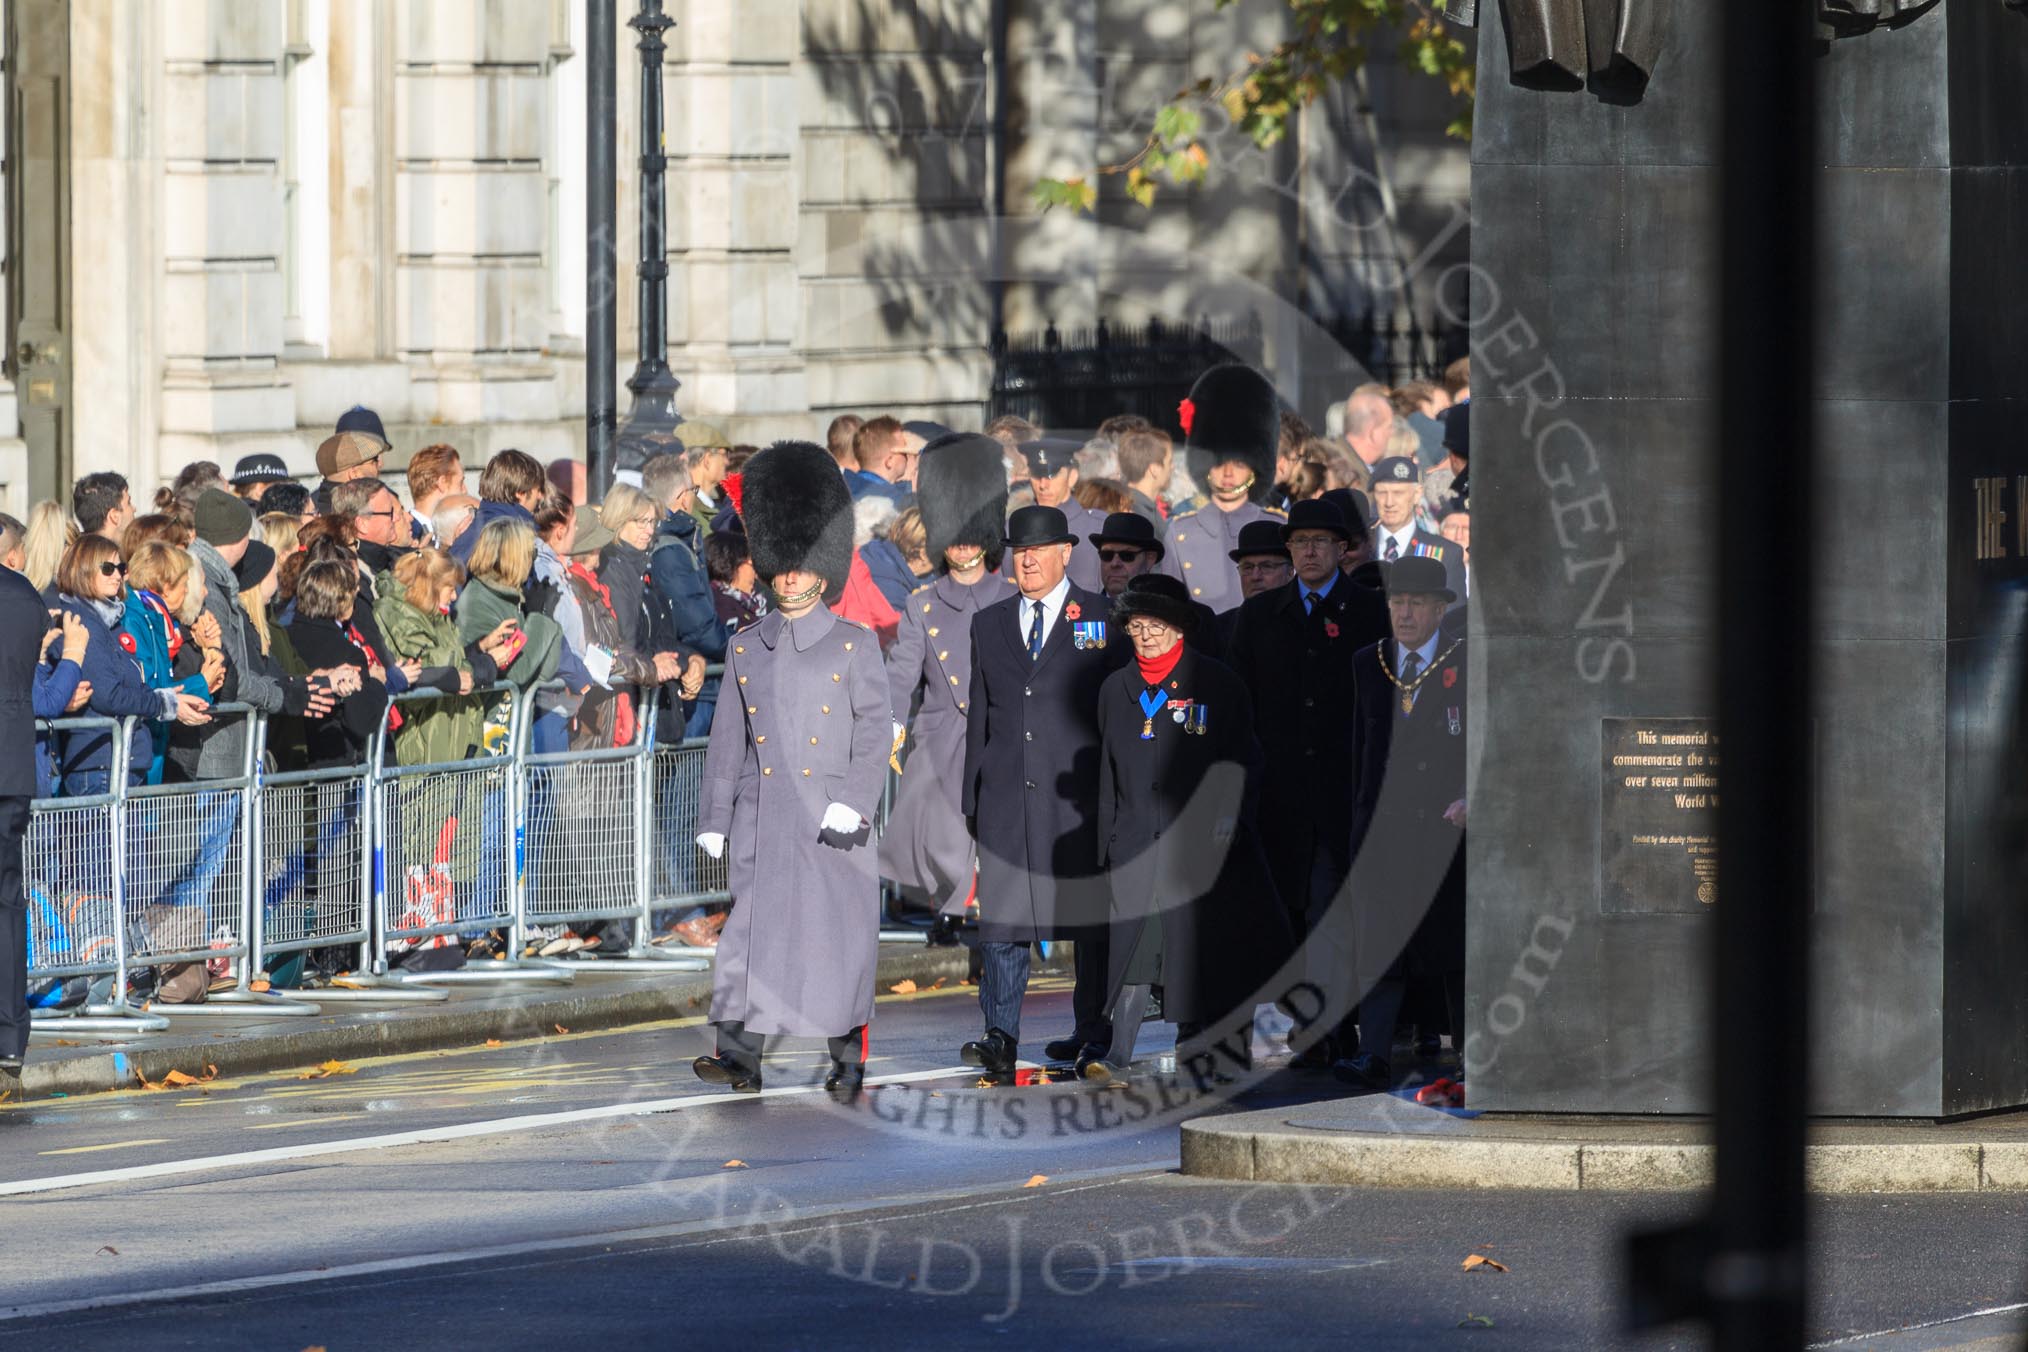 The first group of the March Past, I believe RBL officials, is waiting next to the Memorial for Women in World War II before the Remembrance Sunday Cenotaph Ceremony 2018 at Horse Guards Parade, Westminster, London, 11 November 2018, 10:07.